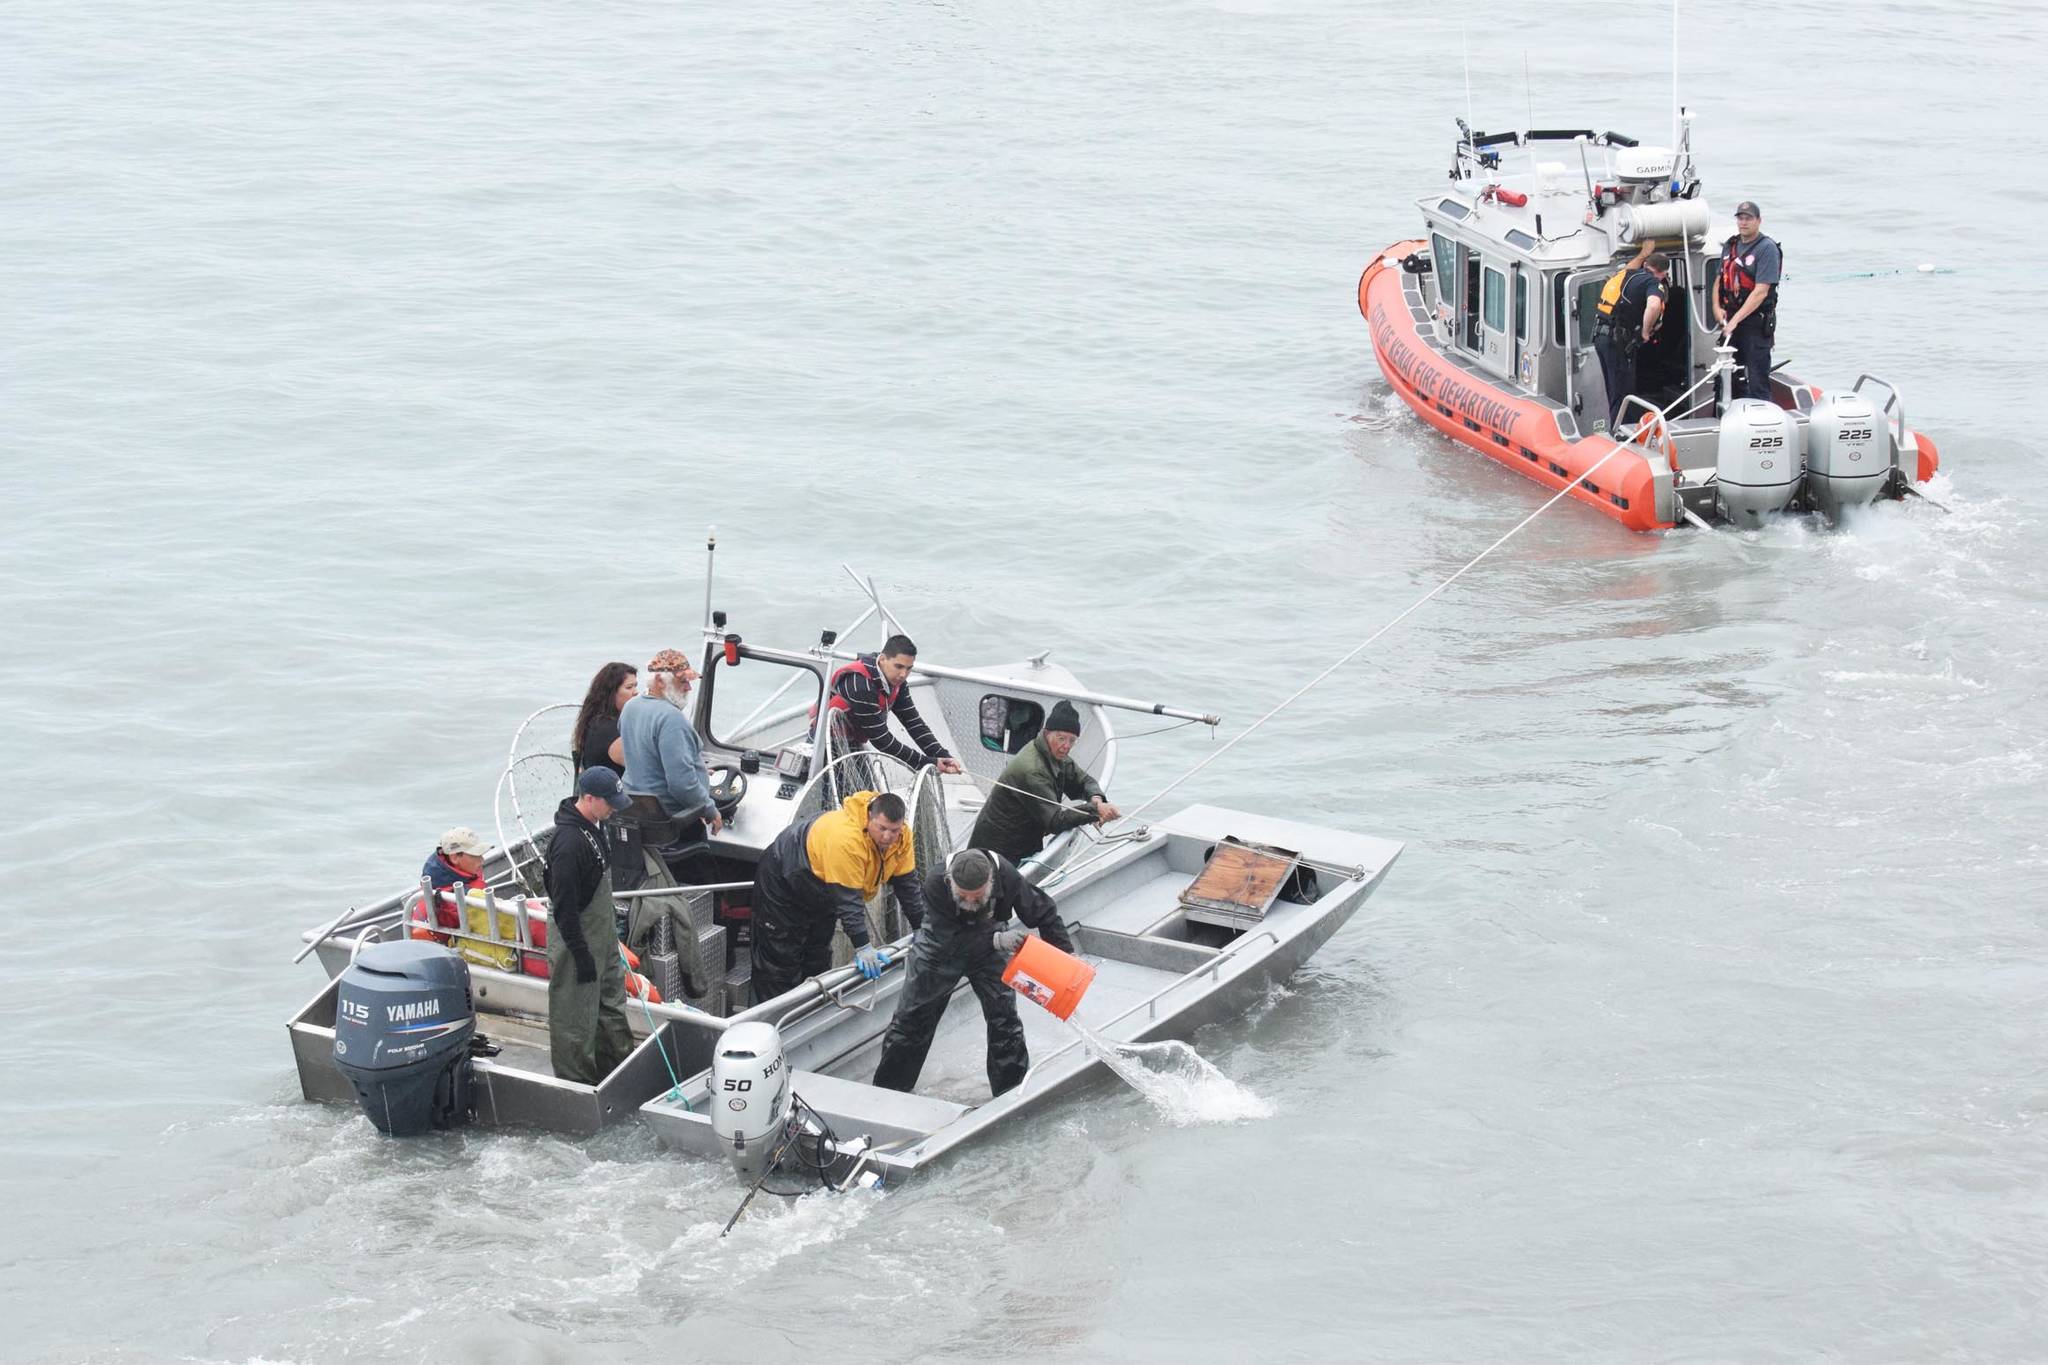 Members of the Kenai Fire Department and Kenai Police Department tow two boats behind them, one that capsized and another that came to the rescue, while passengers work to bail out the capsized boat July 22, 2016 on the Kenai River in Kenai, Alaska. (File photo by Megan Pacer/Peninsula Clarion)